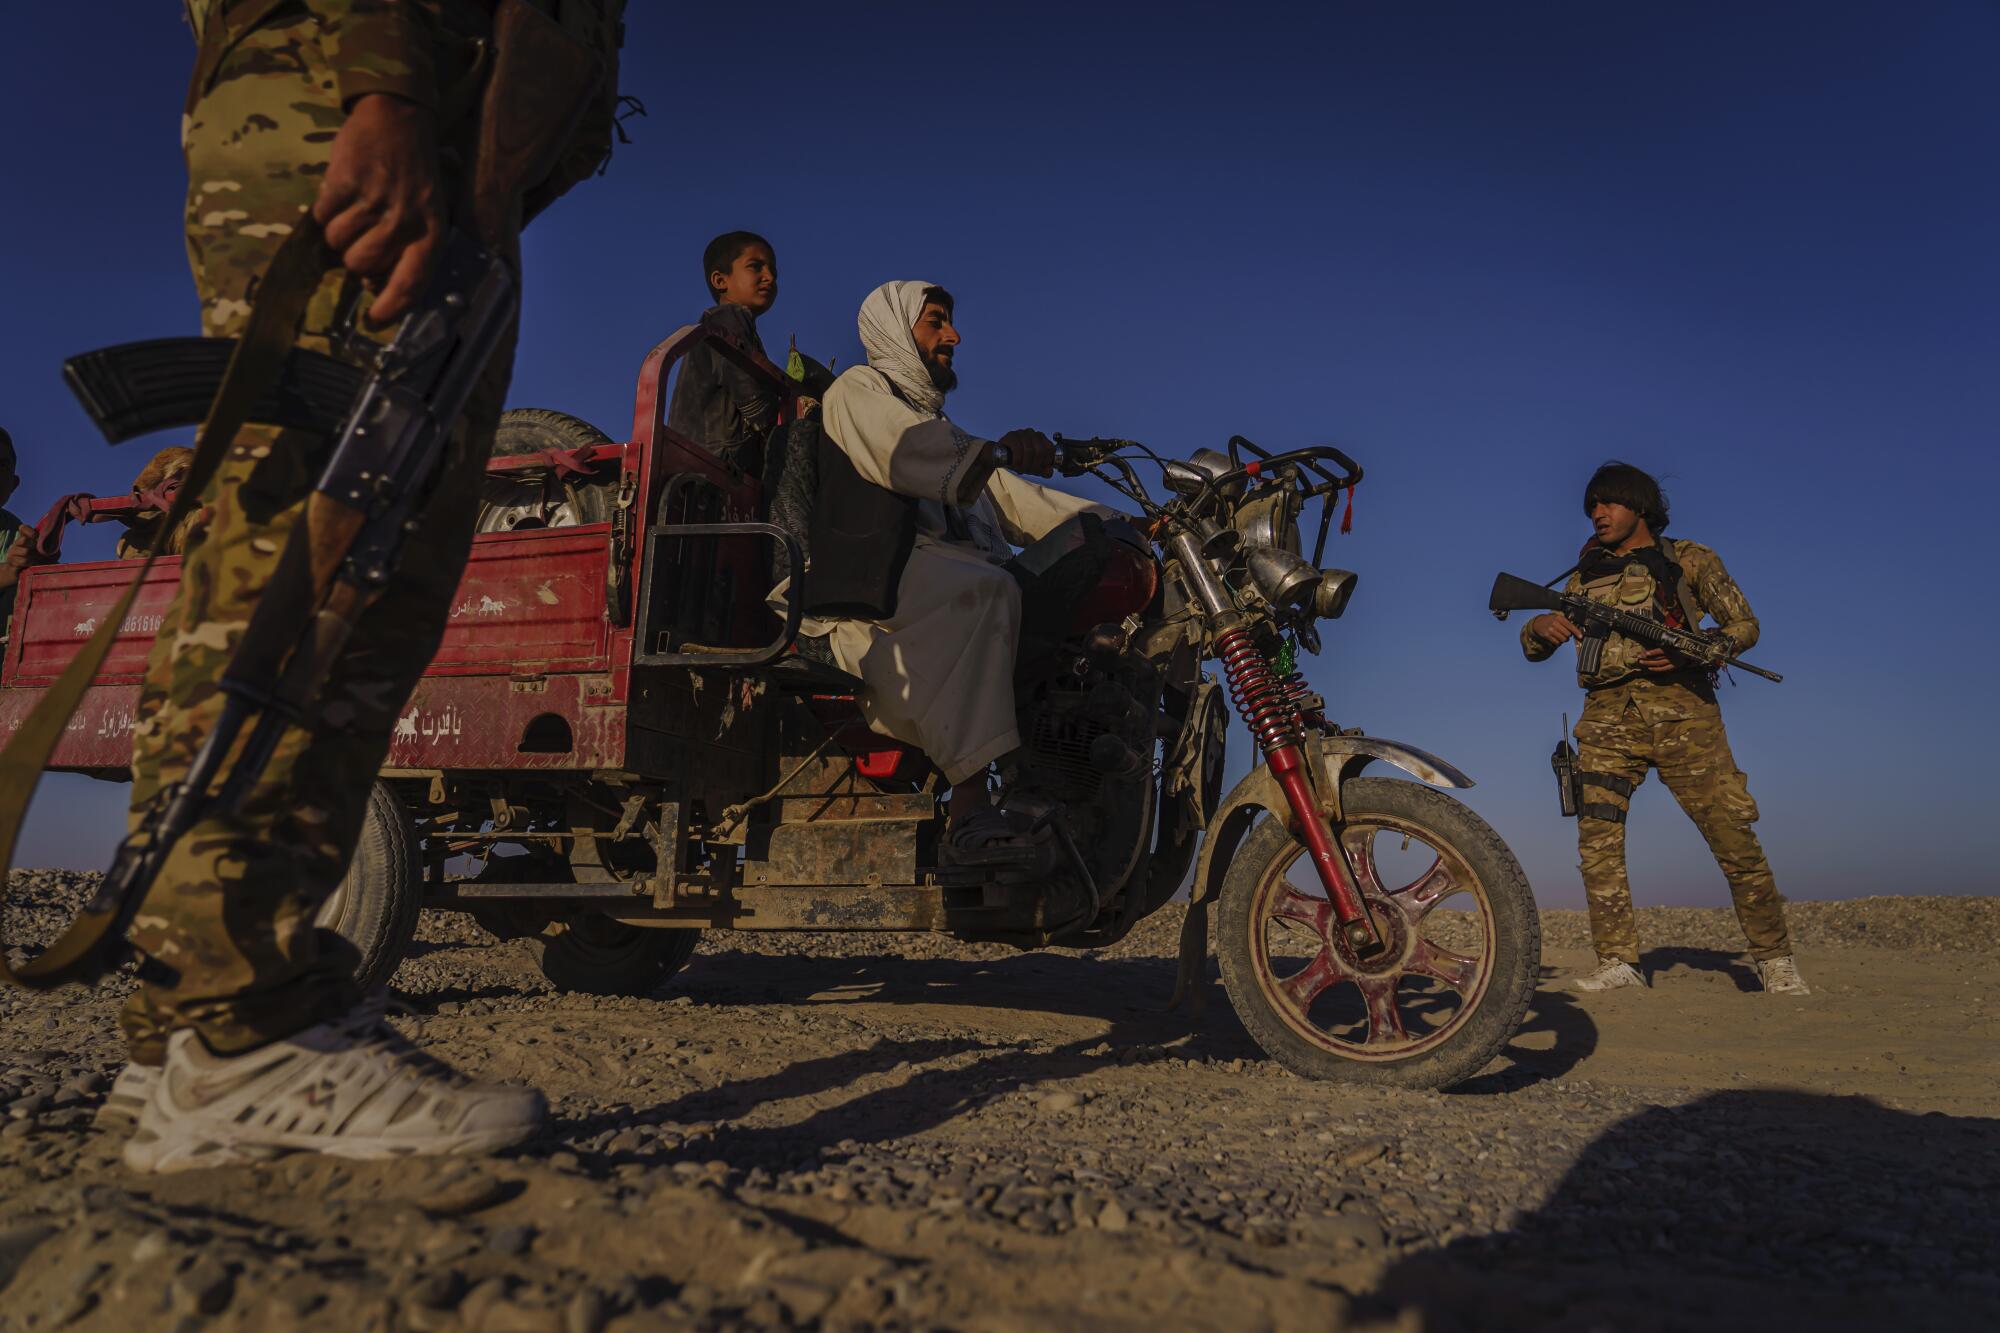 Afghan police officers in sneakers and camouflage talk to two people on a three-wheel vehicle.